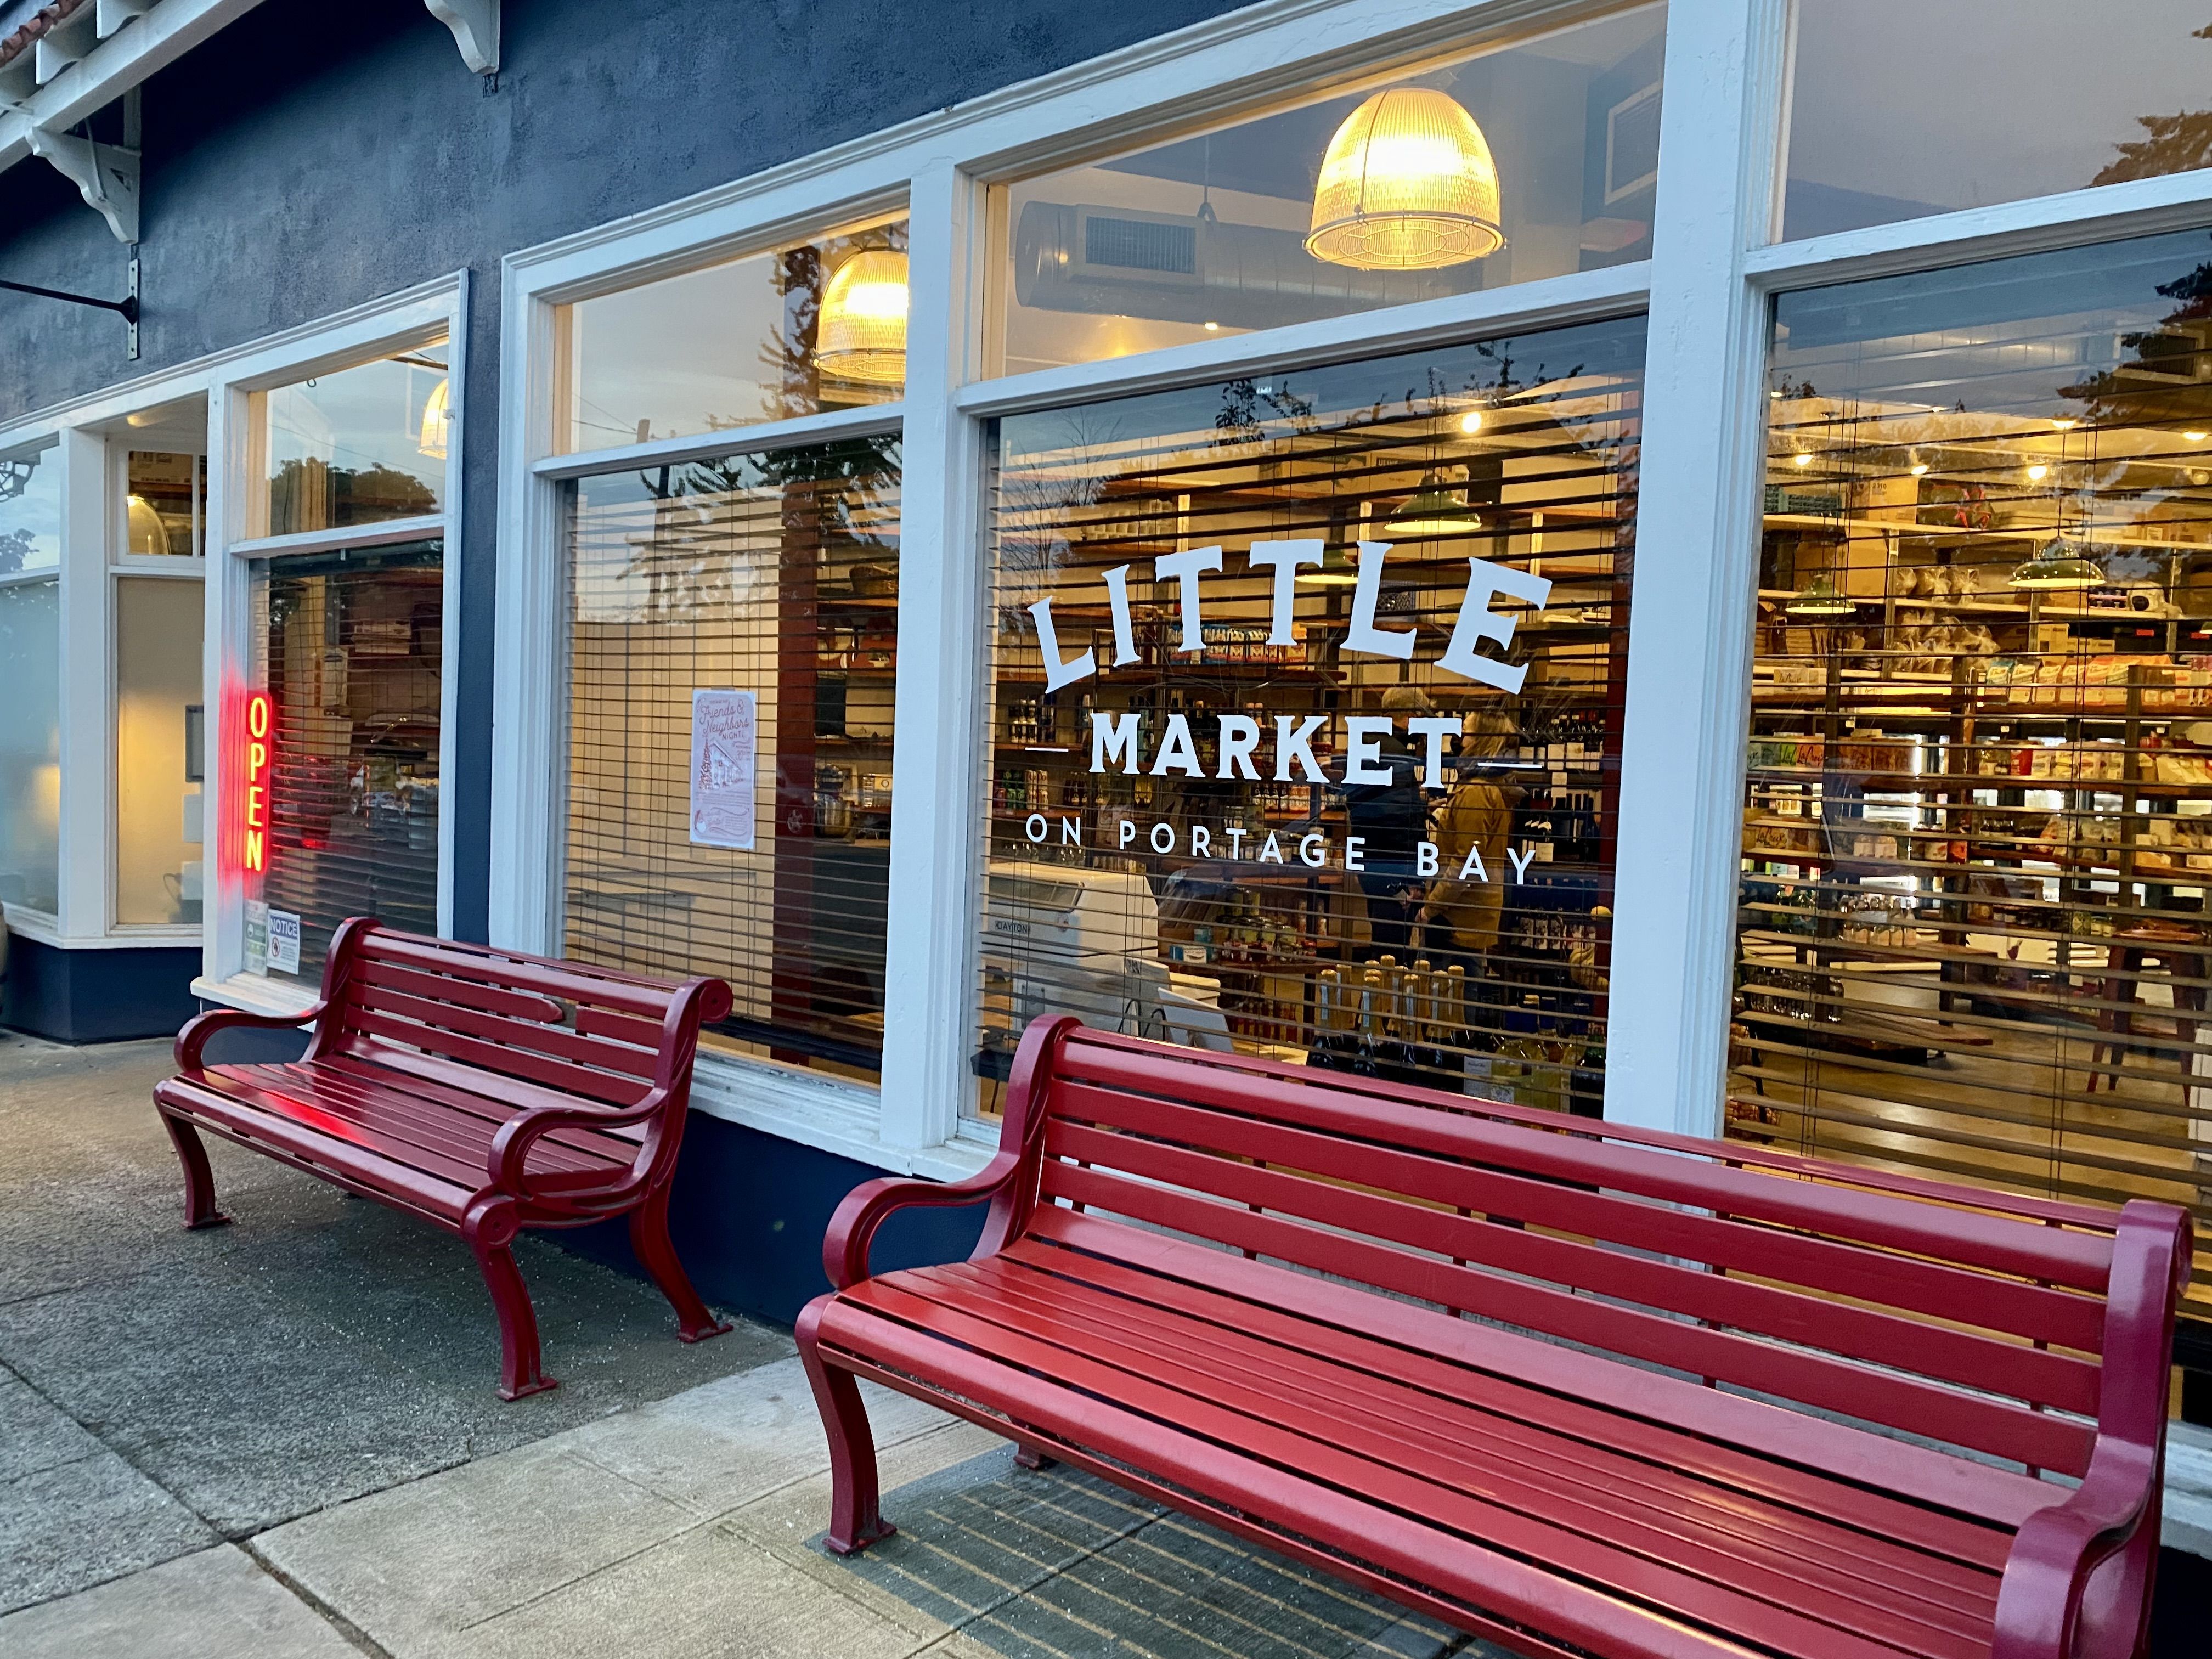 Red benches along a sidewalk, in front of a store window that says "Little Market on Portage Bay"